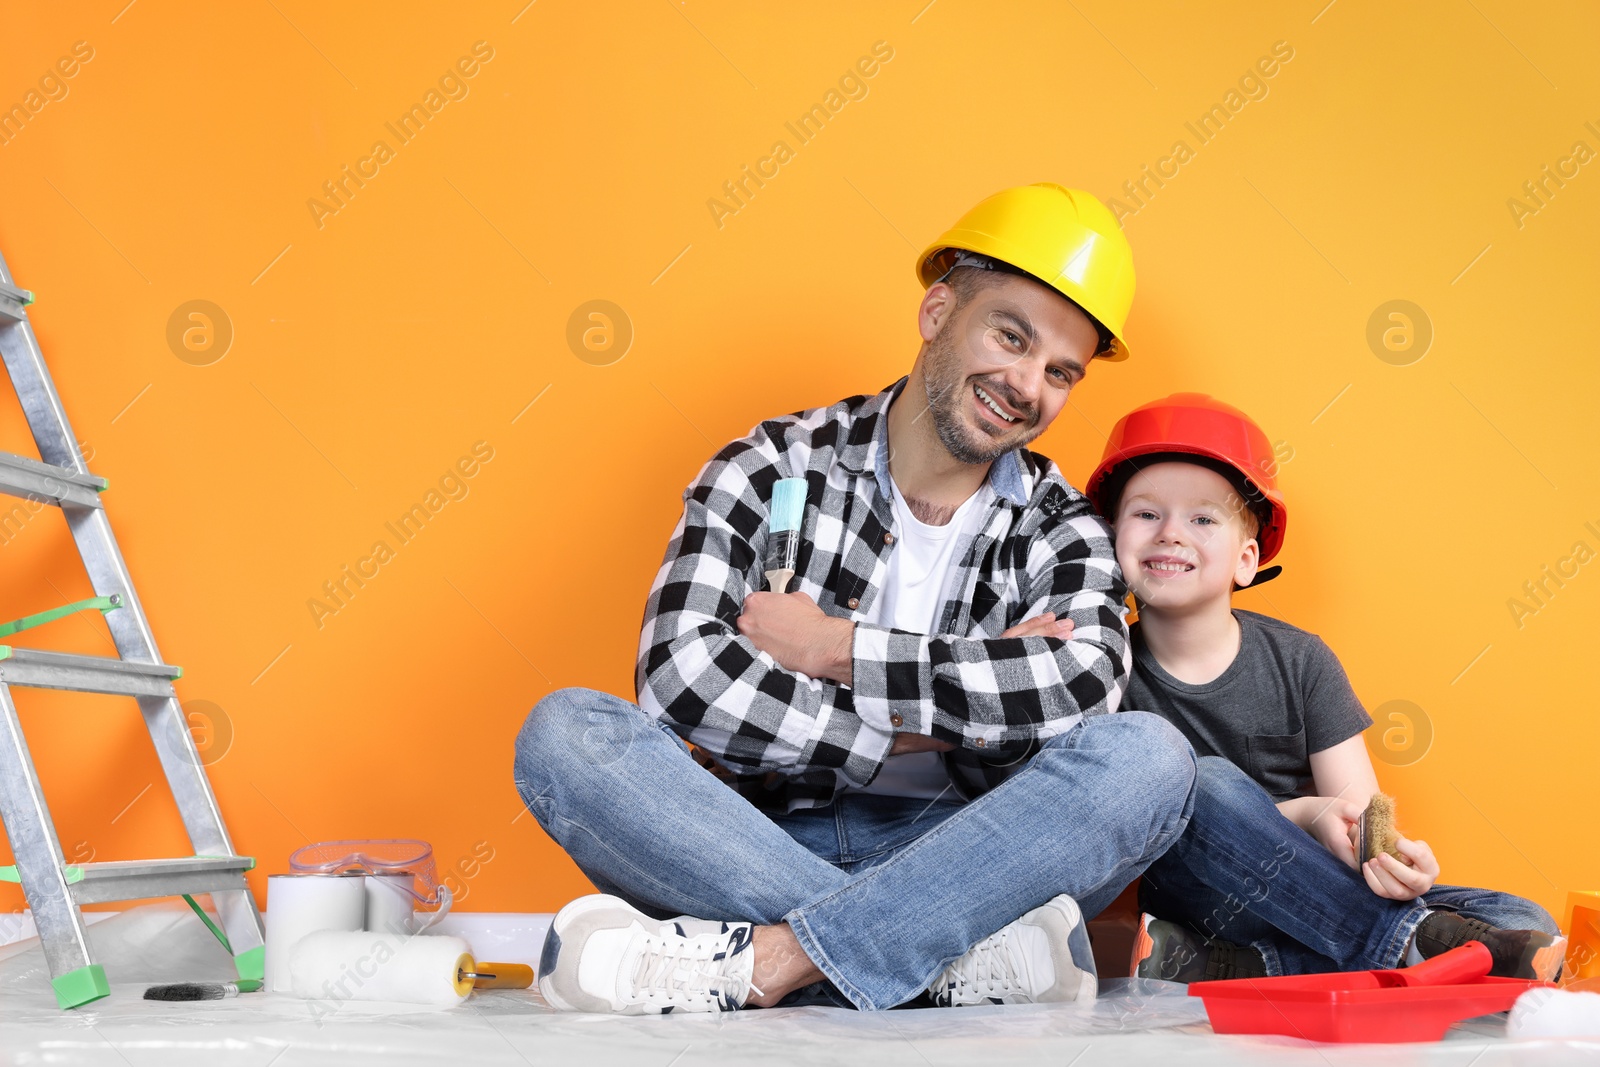 Photo of Father and son with repair tools near orange wall